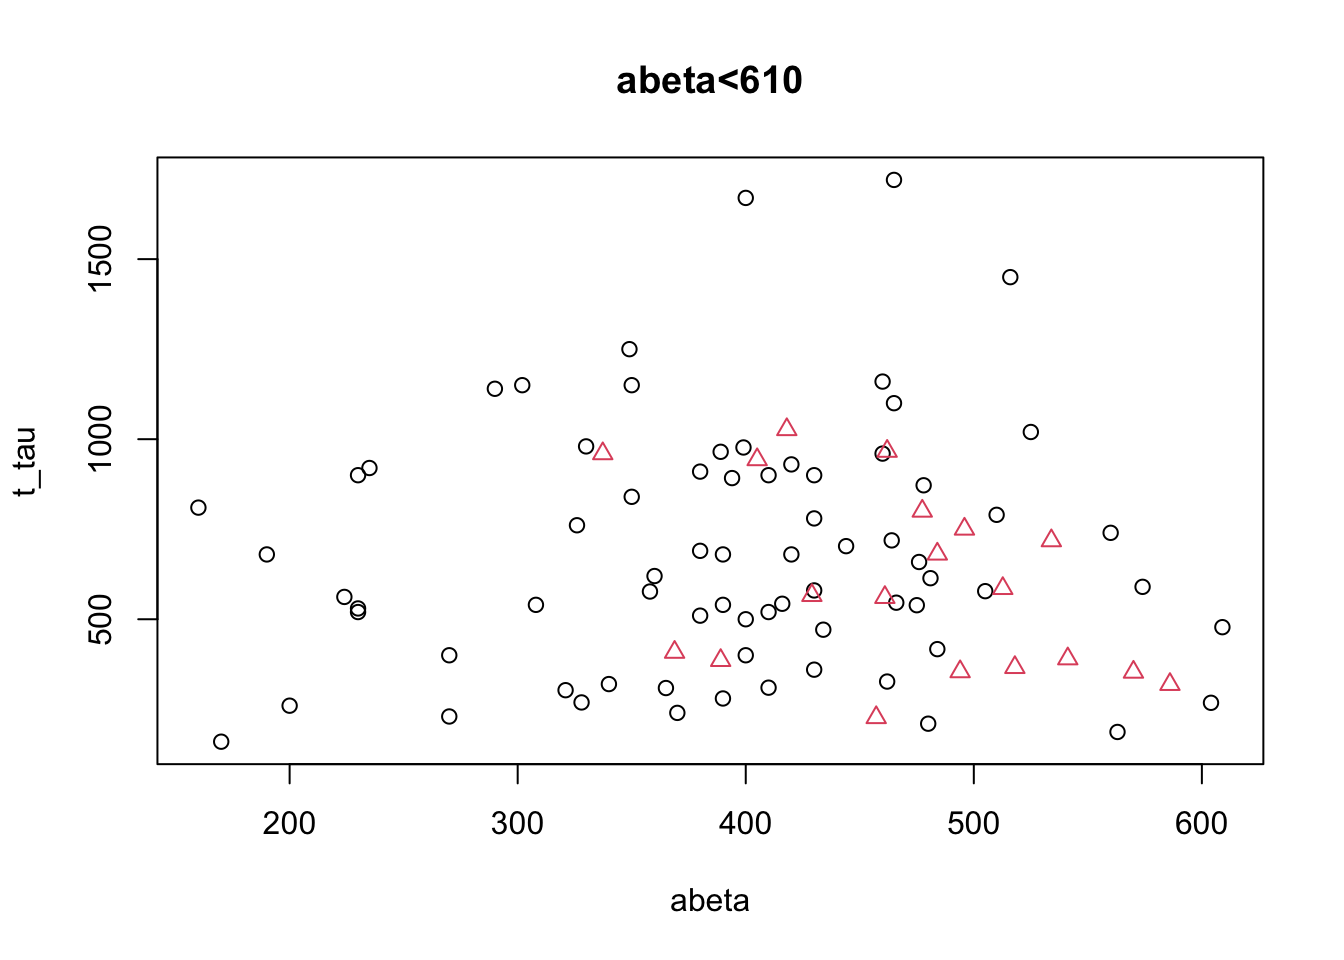 The example of two variables measured on a number of samples. Cut on abeta<610.